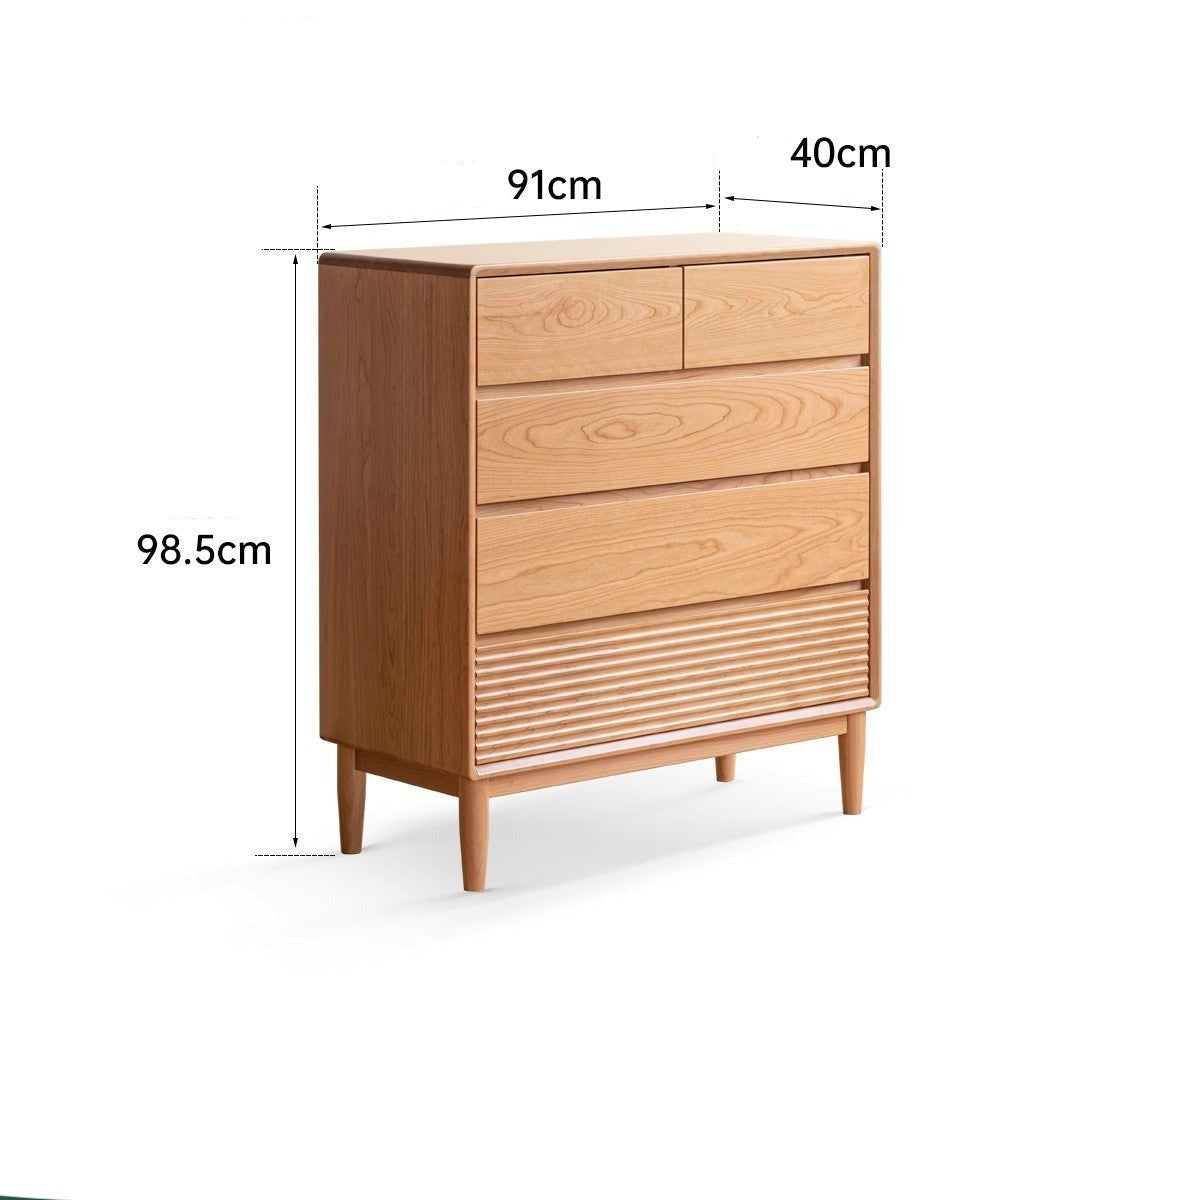 Cherry Wood Chest of Drawers, Nine Drawer Cabinet)